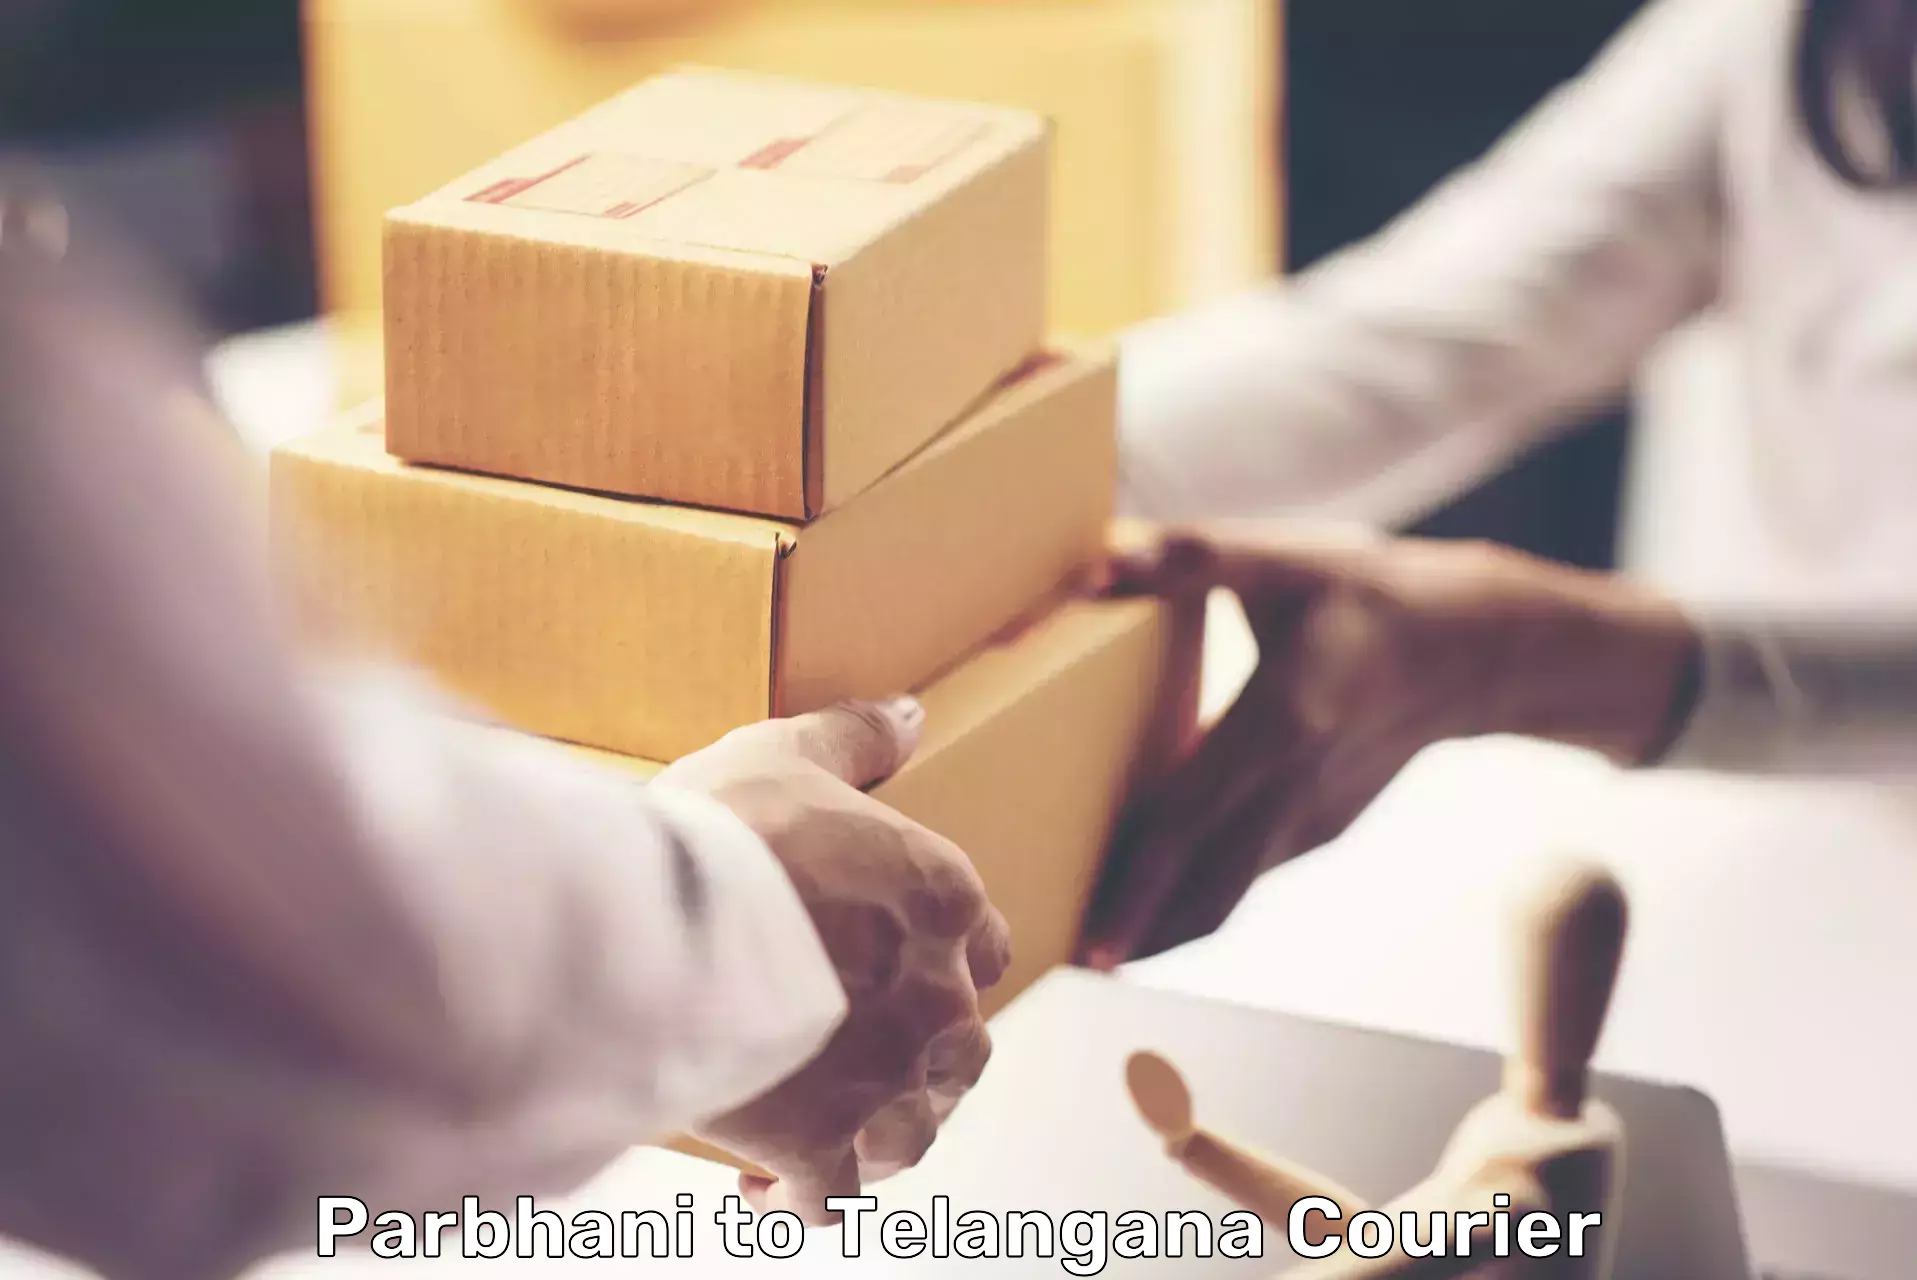 Personal parcel delivery in Parbhani to Telangana